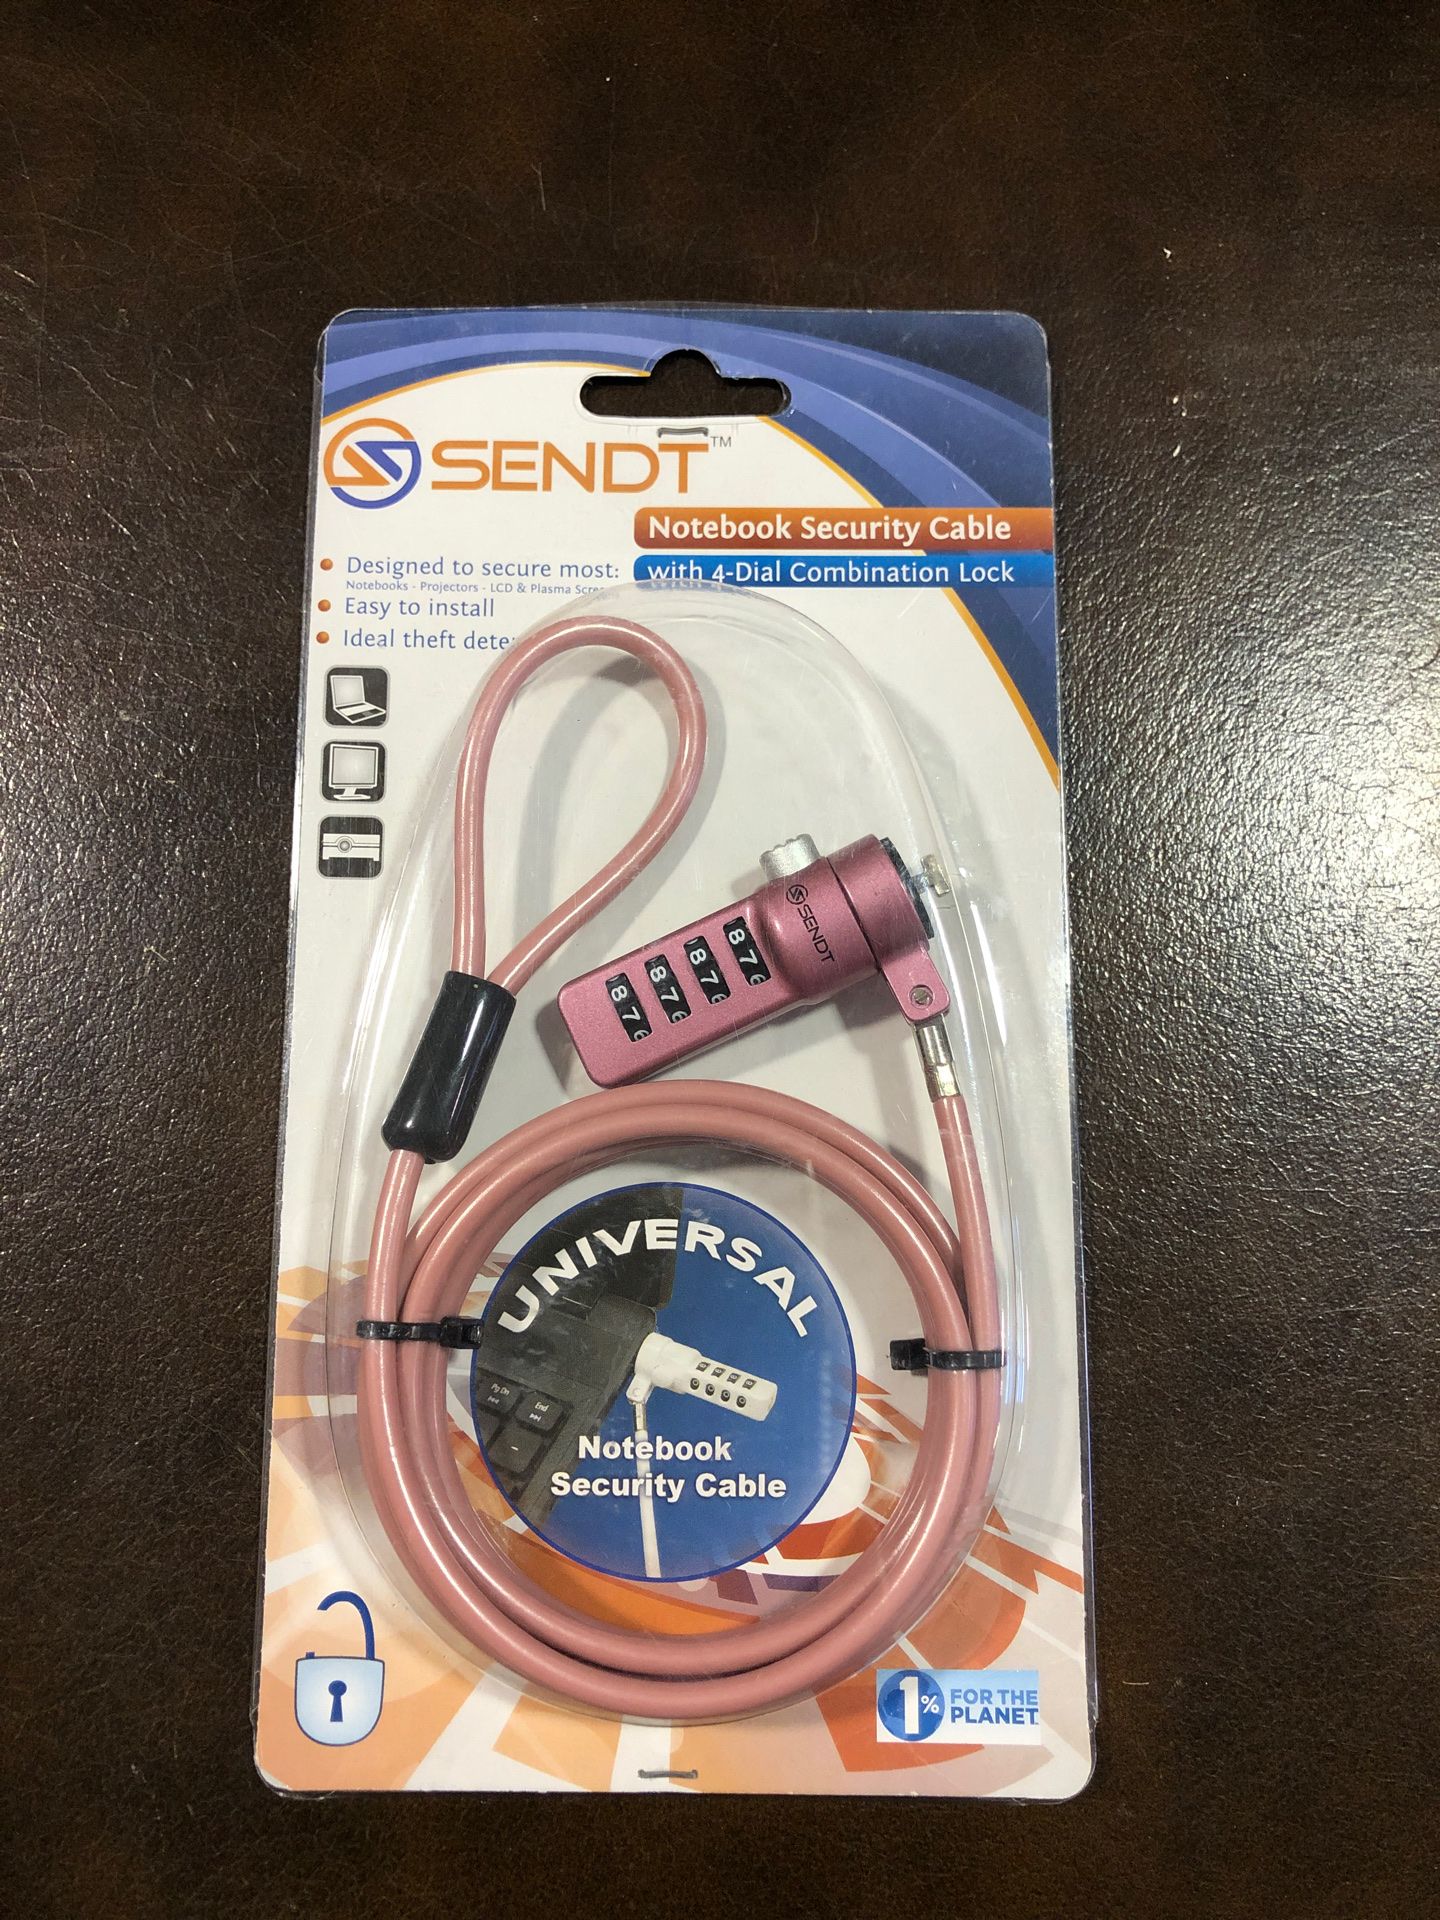 SENDT Notebook Security Cable (NEW)